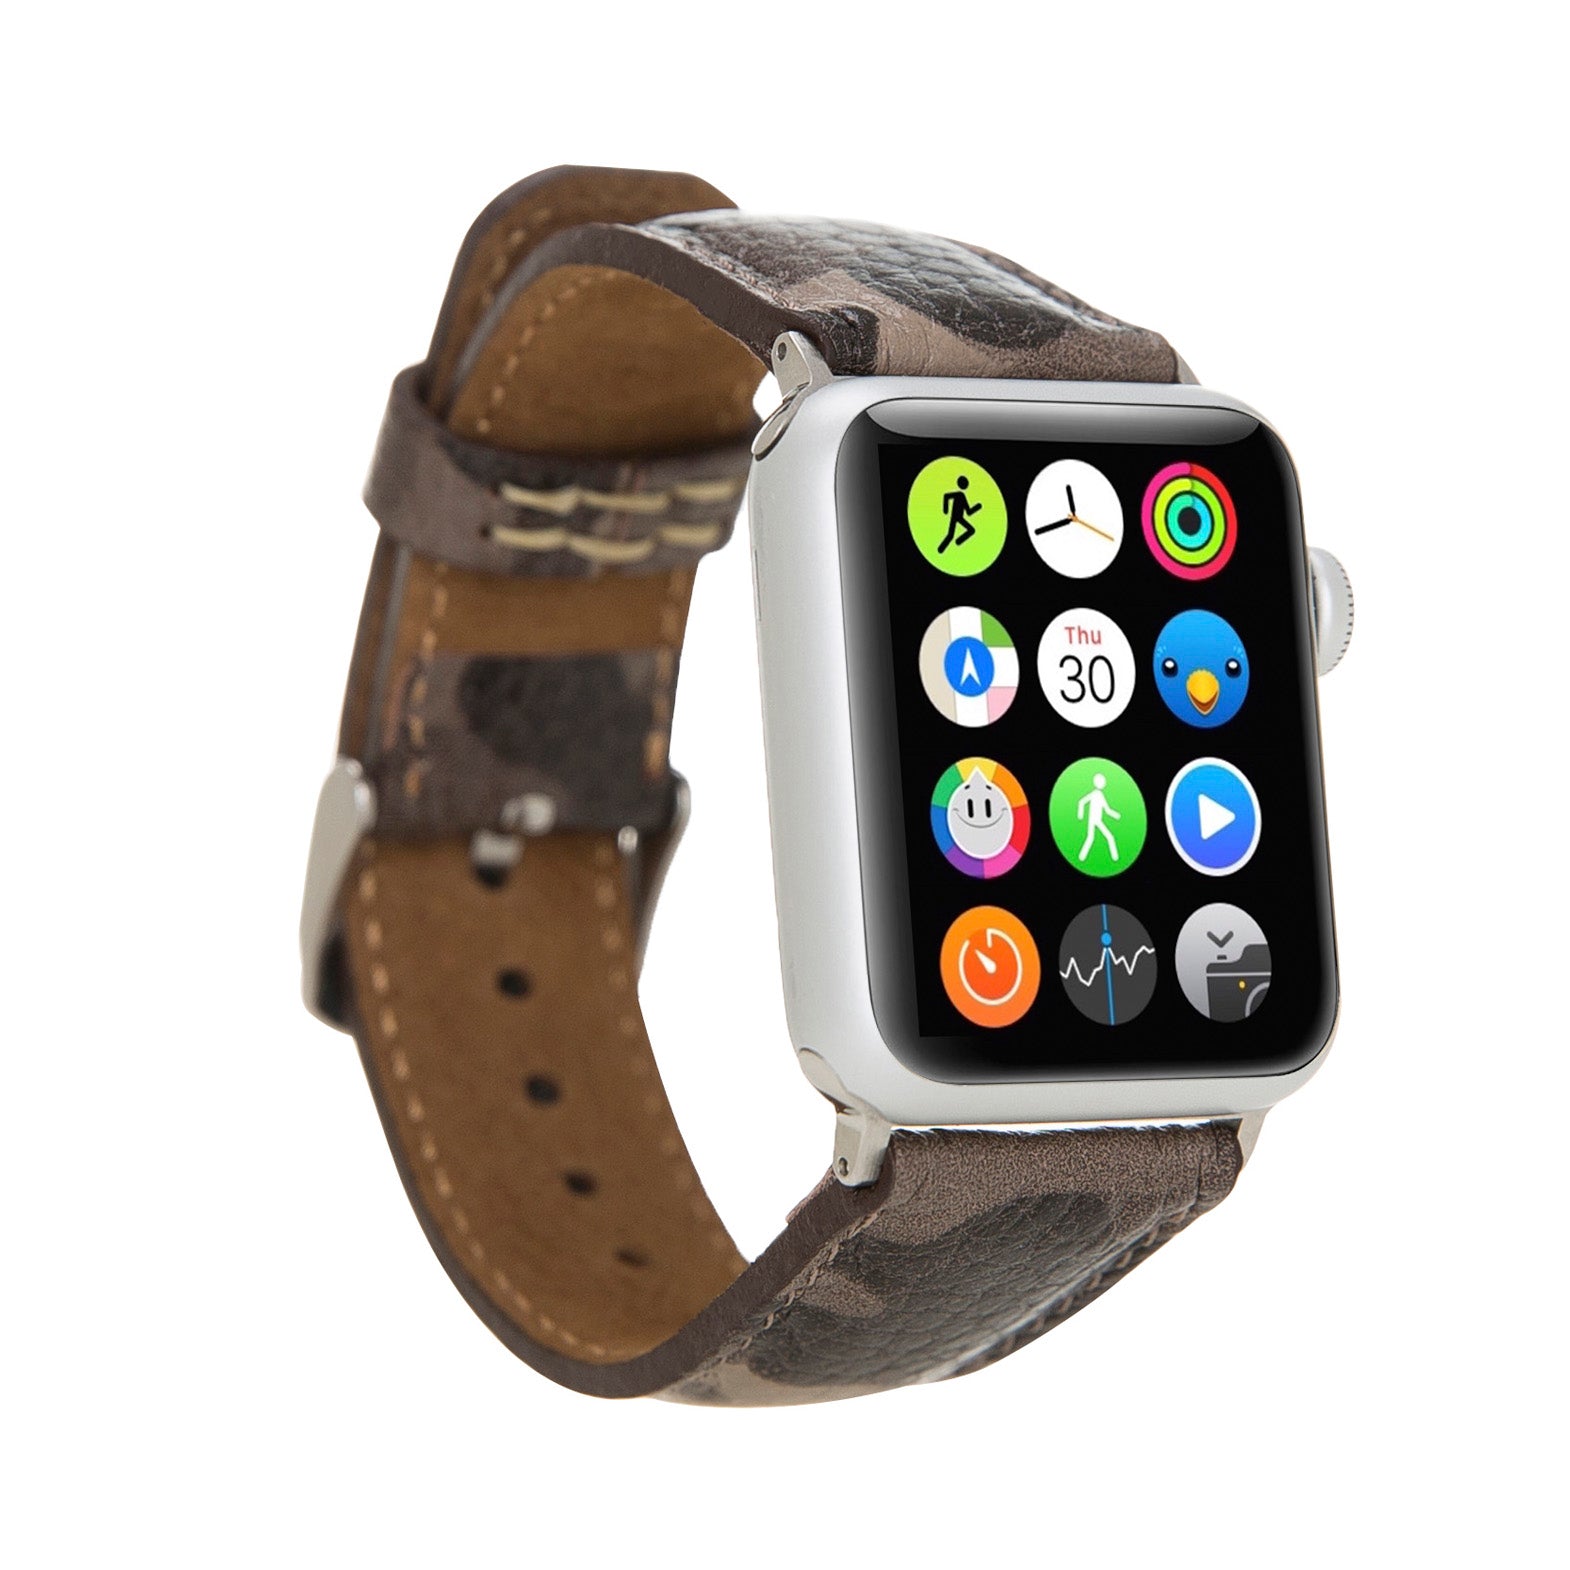 Full Grain Leather Band for Apple Watch - CAMOUFLAGE BROWN - saracleather